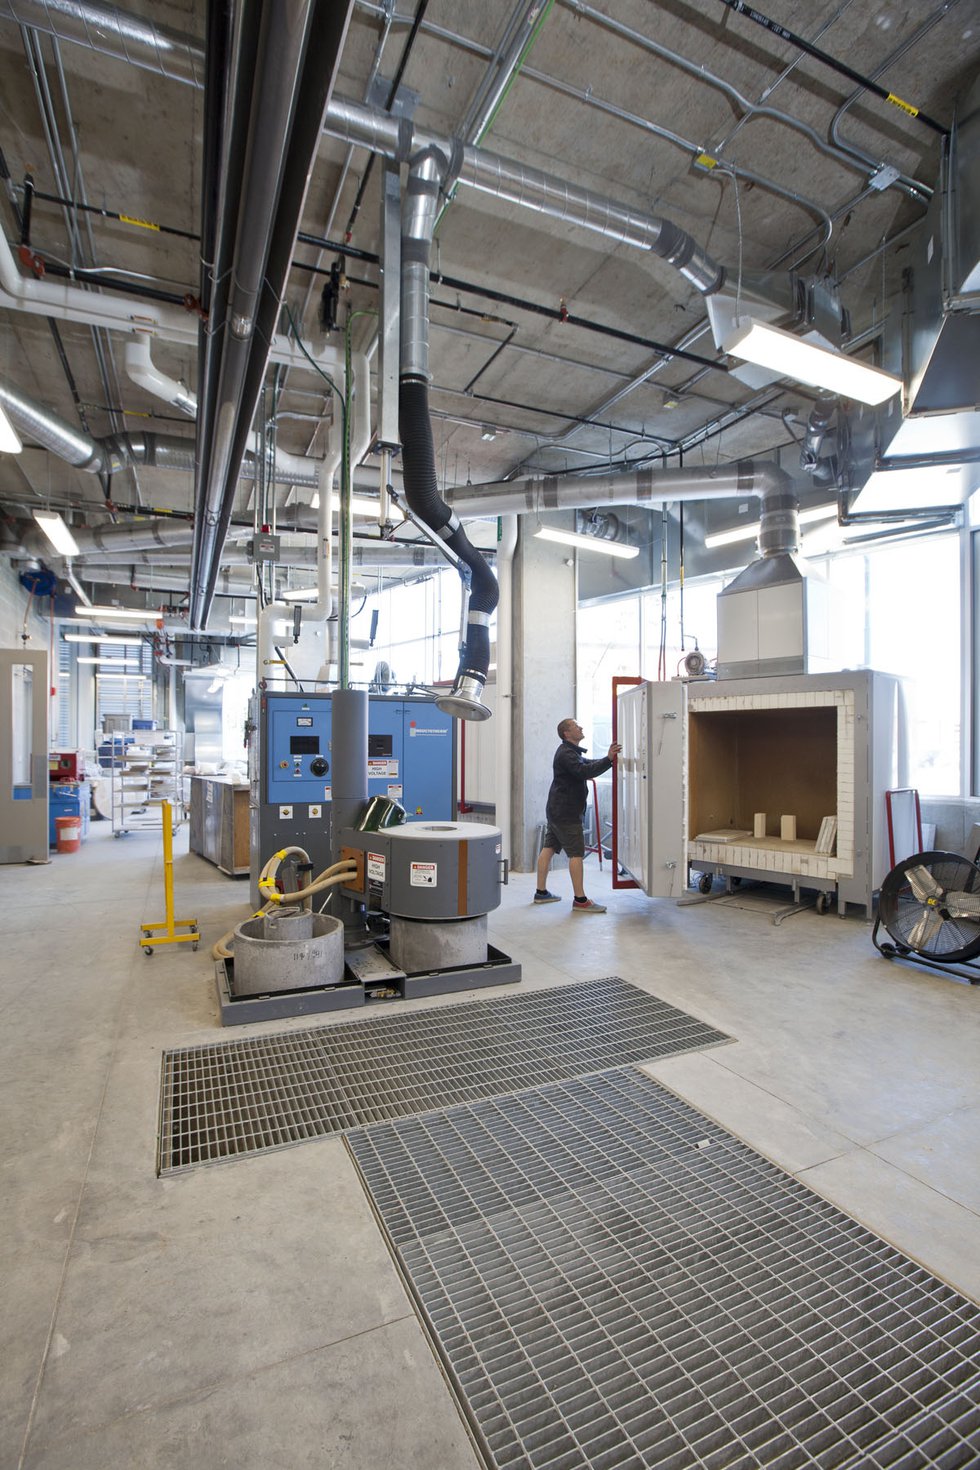 A view of the foundry and ceramic kilns at Emily Carr University of Art and Design in Vancouver. Photo courtesy of ECUAD.